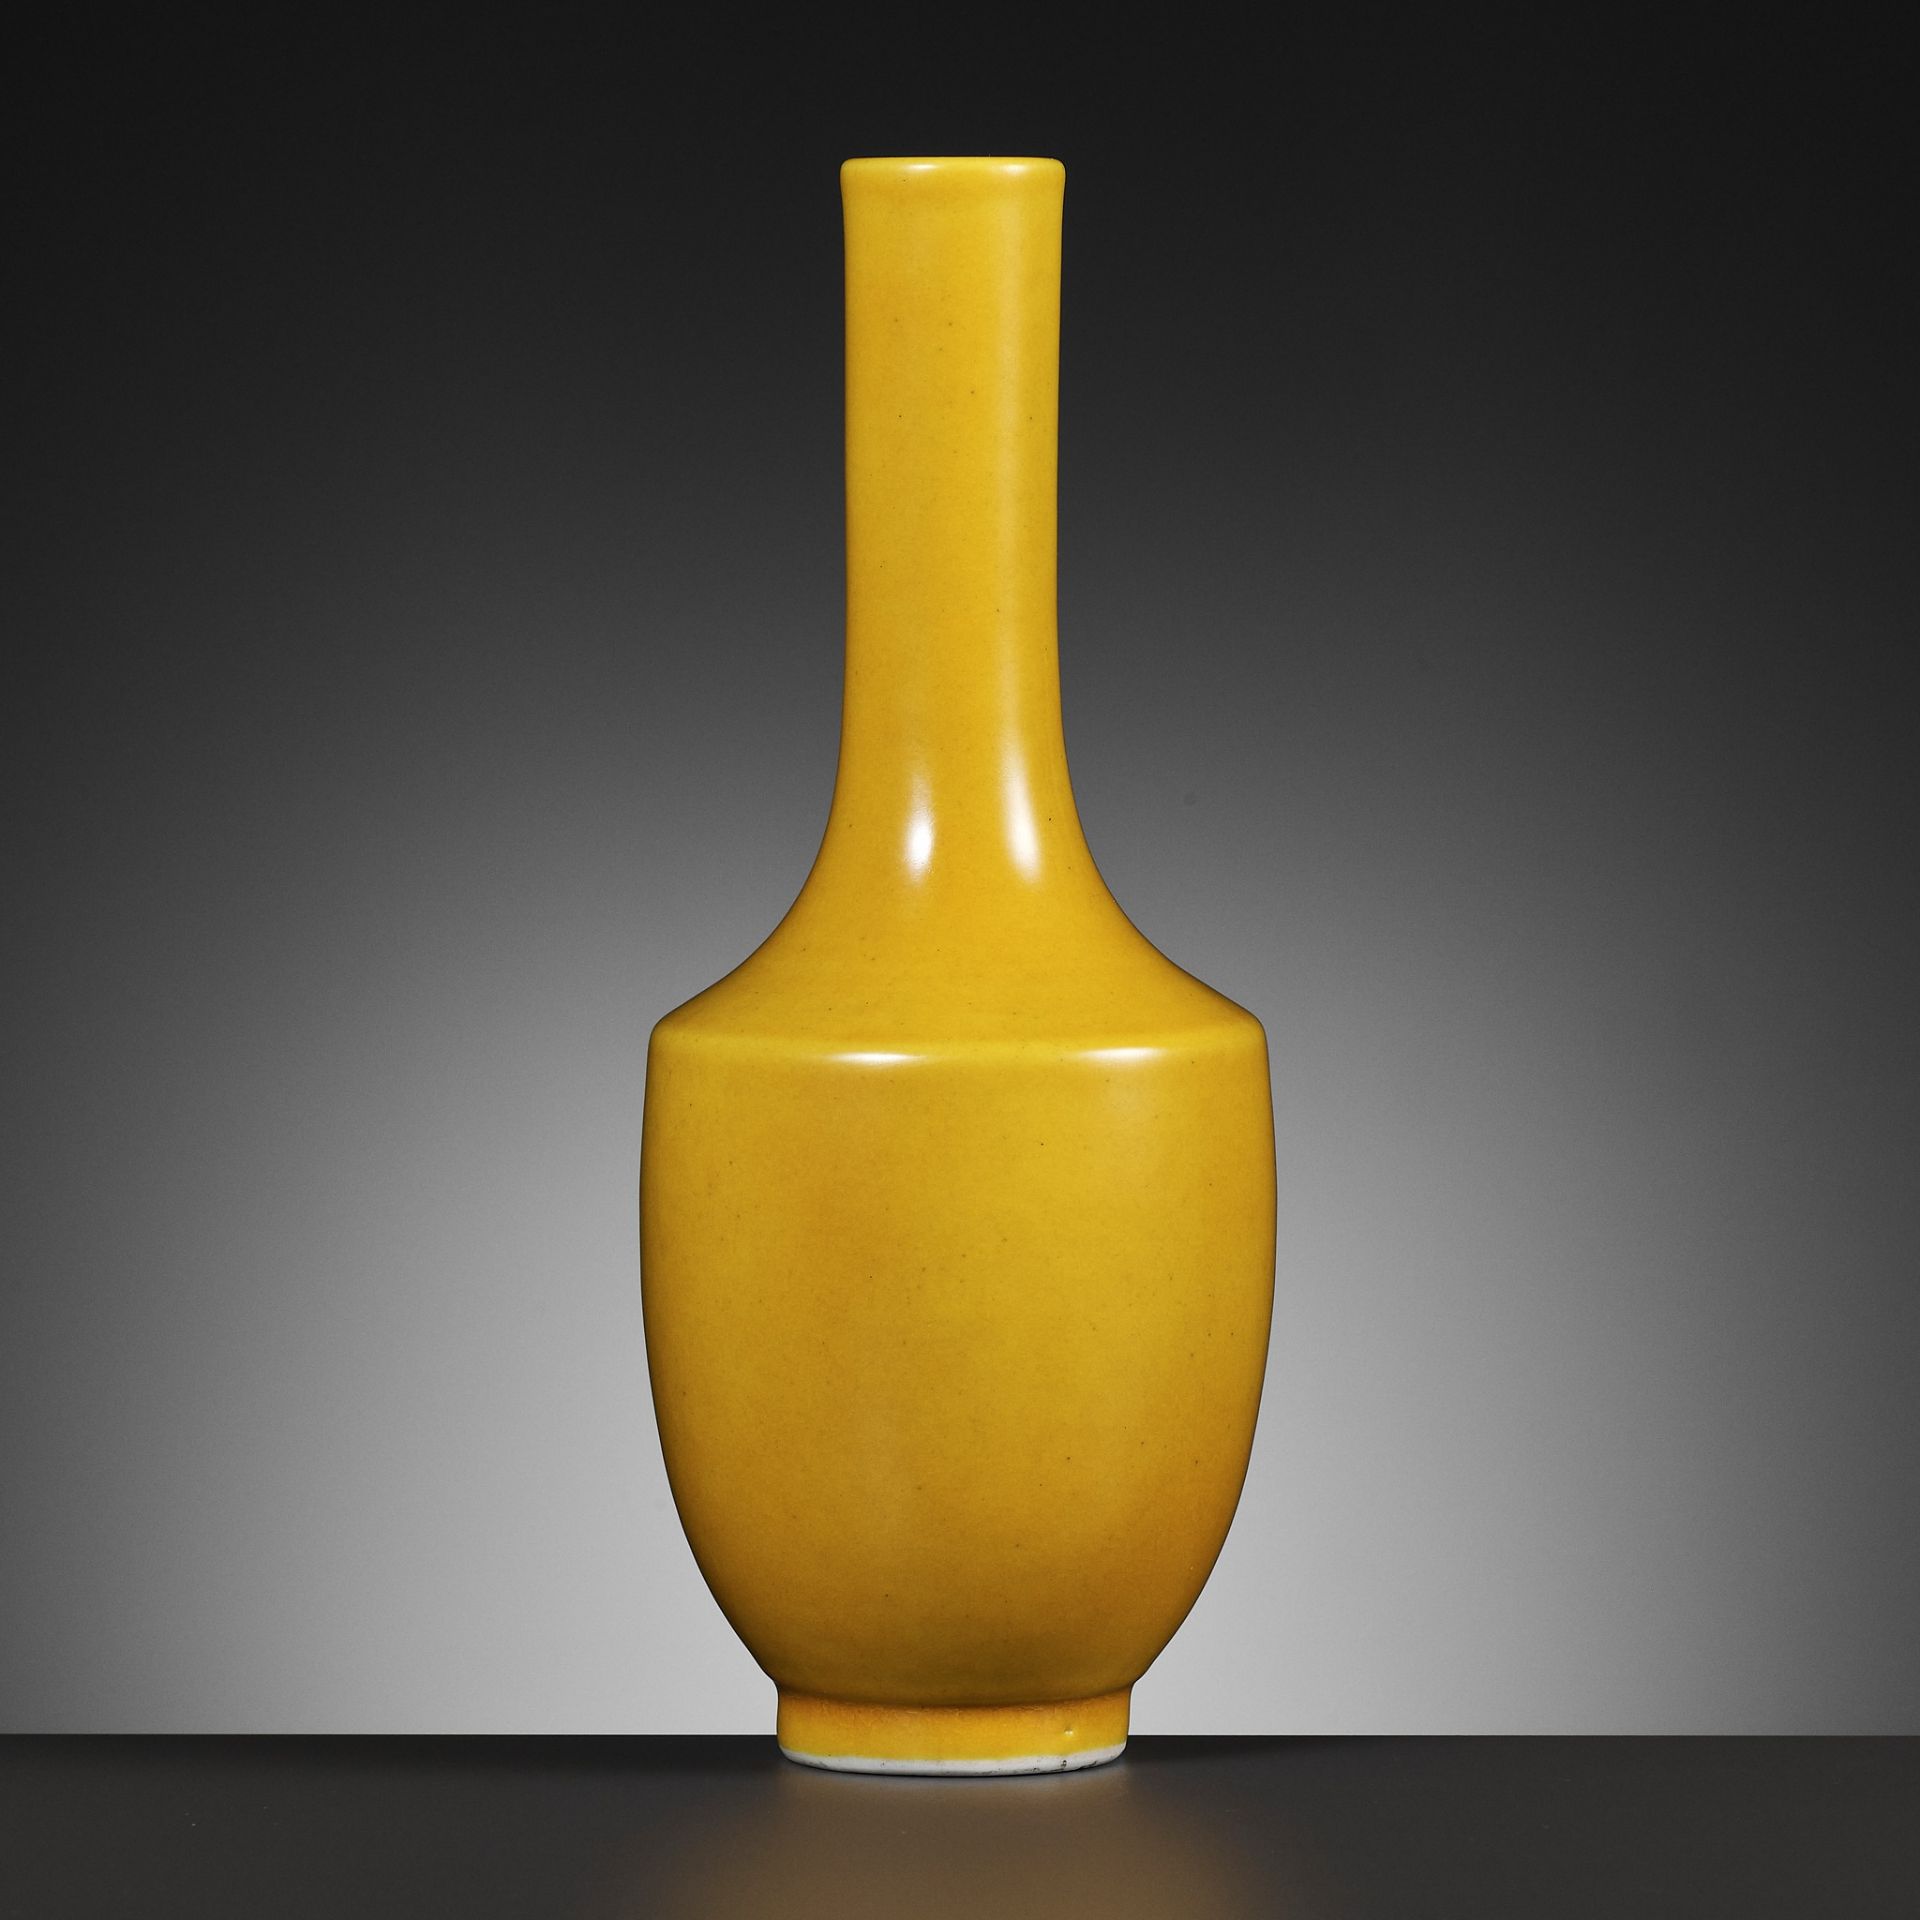 AN IMPERIAL YELLOW-GLAZED MONOCHROME MALLET VASE, YONGZHENG MARK, QING DYNASTY